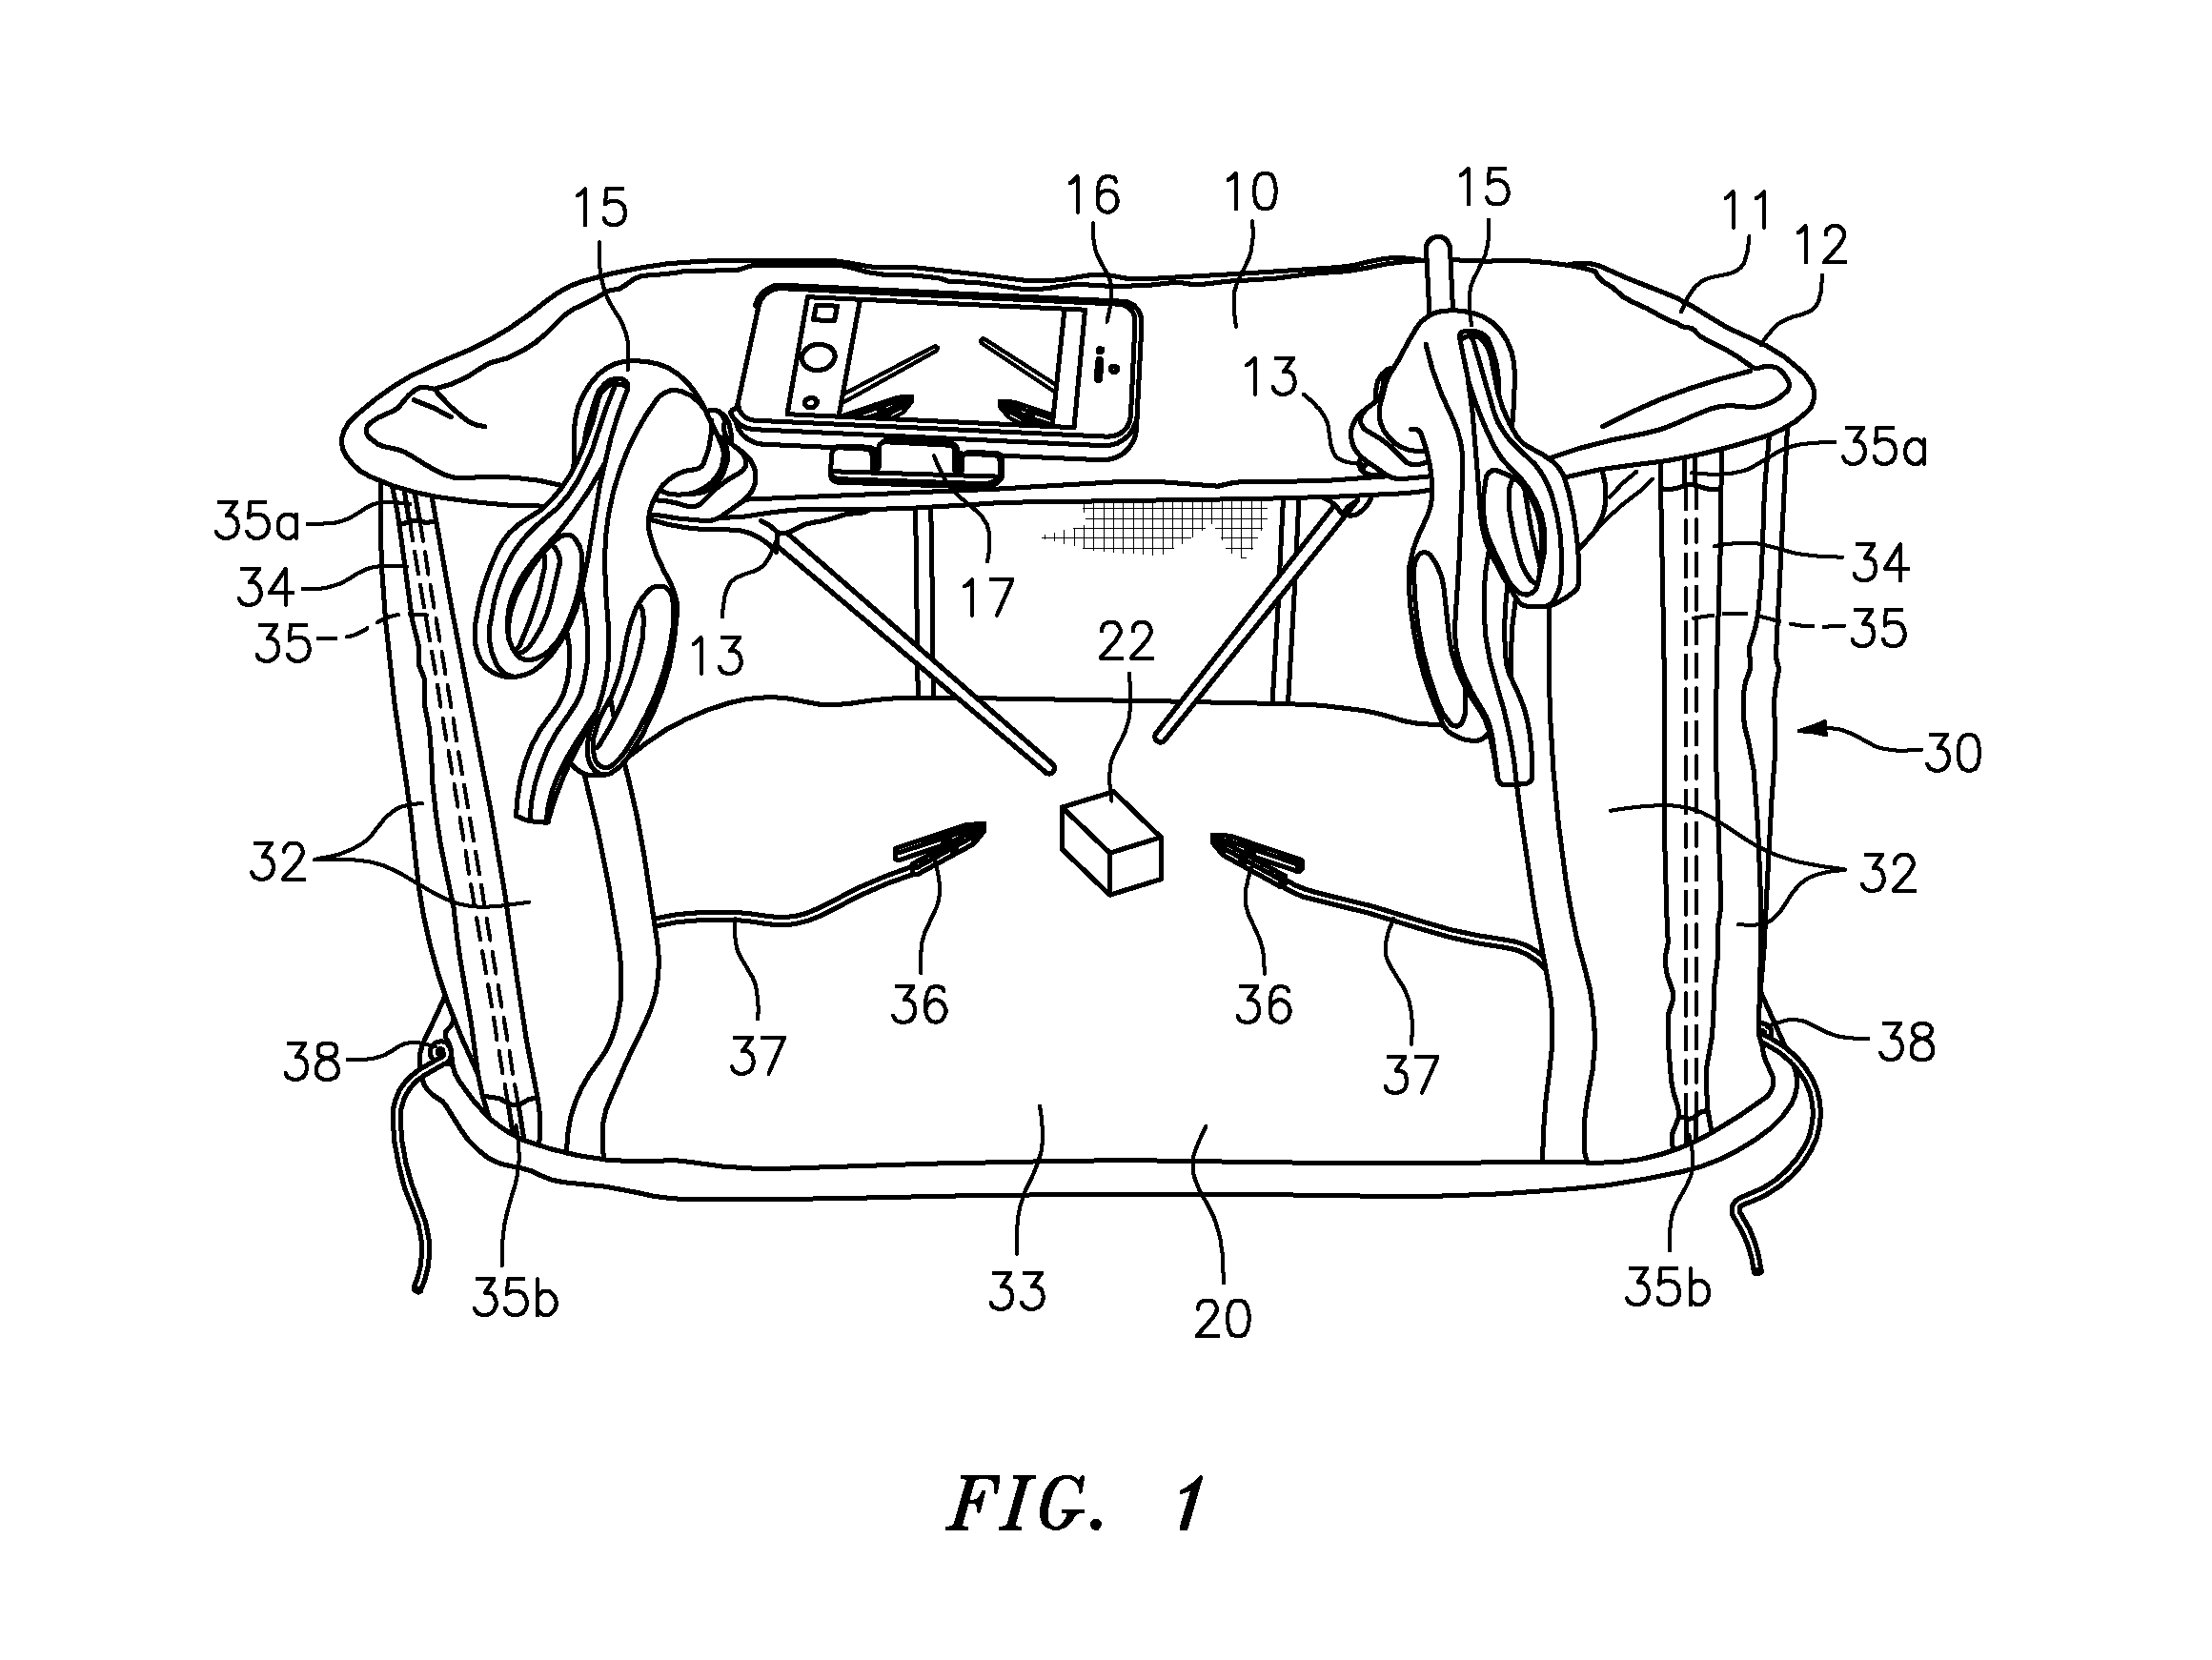 Collapsible Surgical Training Apparatus and Method for Laparoscopic Procedures